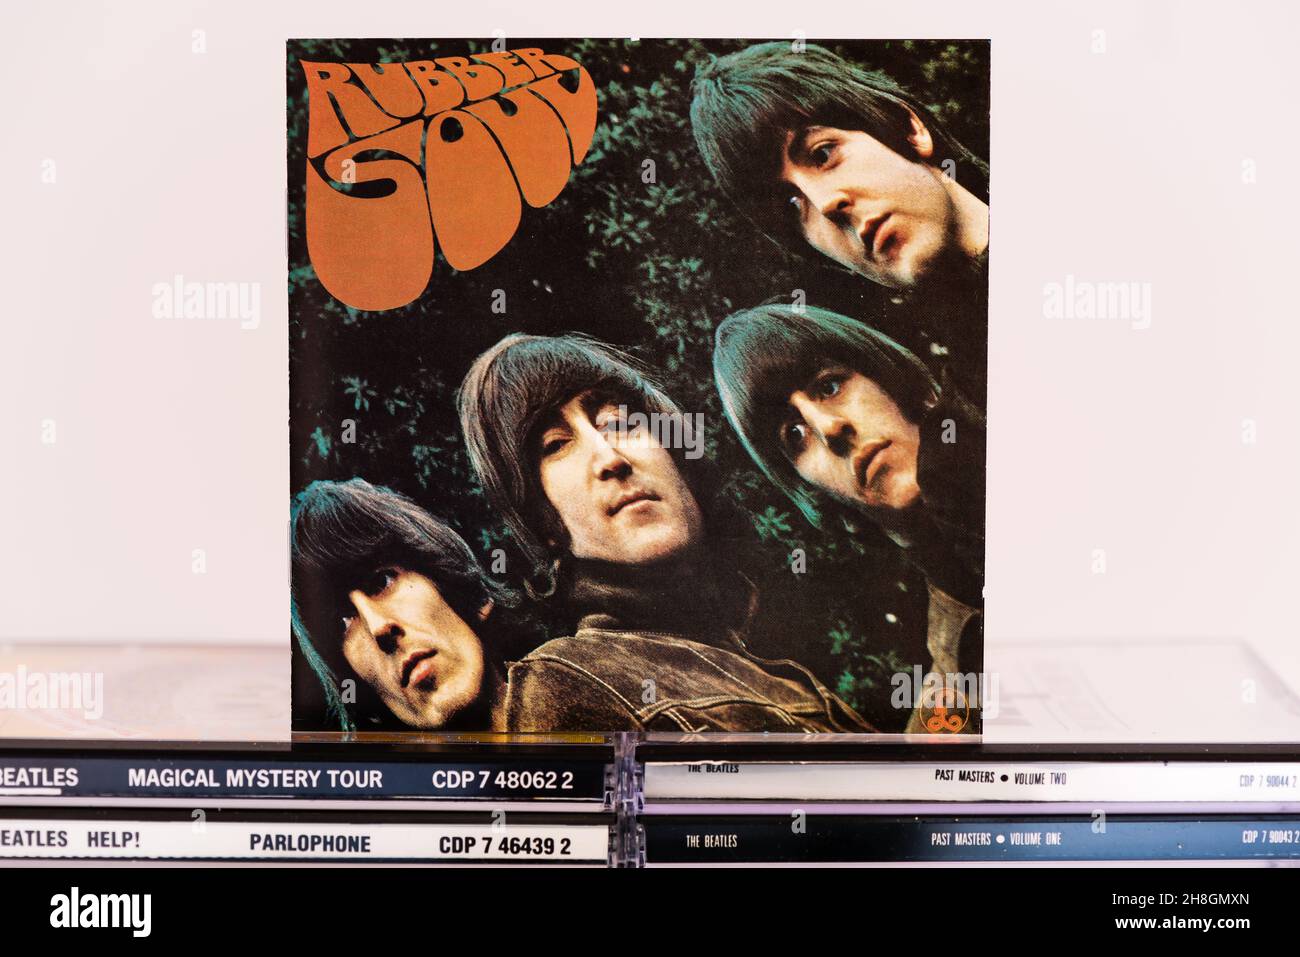 EMI CD  Inlay - The Beatles - Rubber Soul. Stock Photo